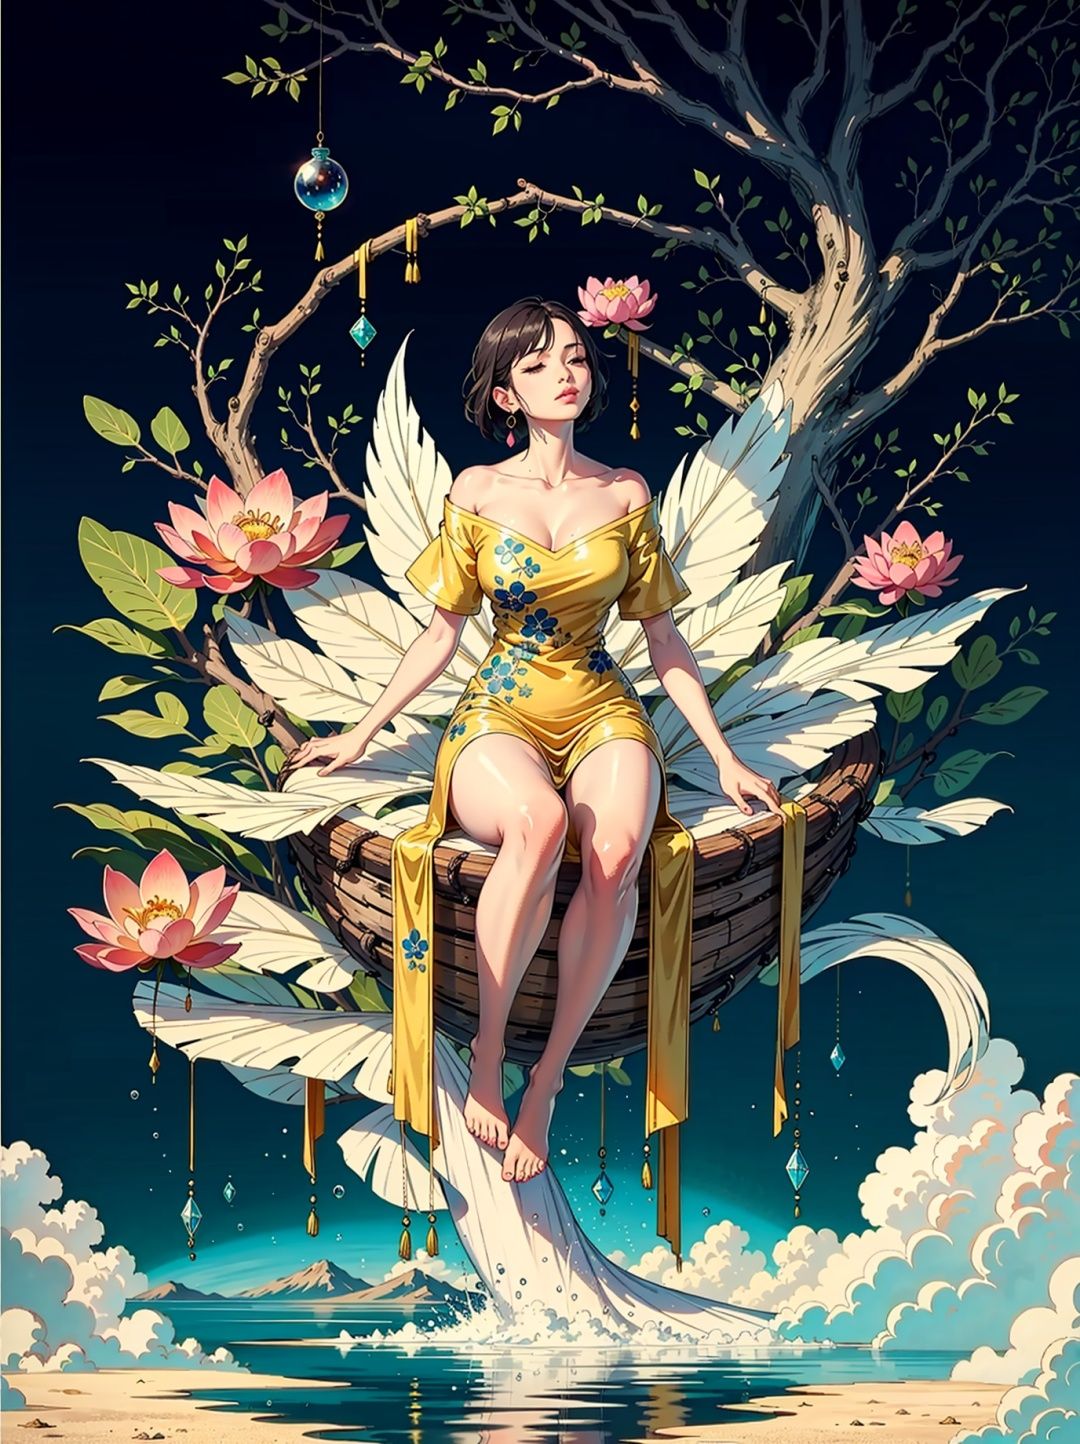 (Lotus Pond, Golden Fairy Dress, Close Up, Jade Ruyi Transparent Dress, Tianchi, Colorful Cloud Sea, Facing Me, Looking Up, Renaissance, Barefoot, 5 Toes, Long Legs, Liquid Tree, Liquid Mountain, Gaseous Sky, High Definition)), (((Super Detailed, Extreme Detail))), Ultra Fine Painting, Master Made, Full Body Photo, High Quality, 8k, Light Rainbow Shining Hair, Short Hair, Perfect eye makeup, chubby lips, collarbone, (huge crystals, soap bubbles, Dingdall effect, coral, coral, plush decoration), A ink painting of a tranquil orchard with Chinese writing on it and a pair of birds building their nest, with a fruit-laden branch in the foreground, An Zhengwen, organic painting, a minimalist painting, art & language, ink and wash,